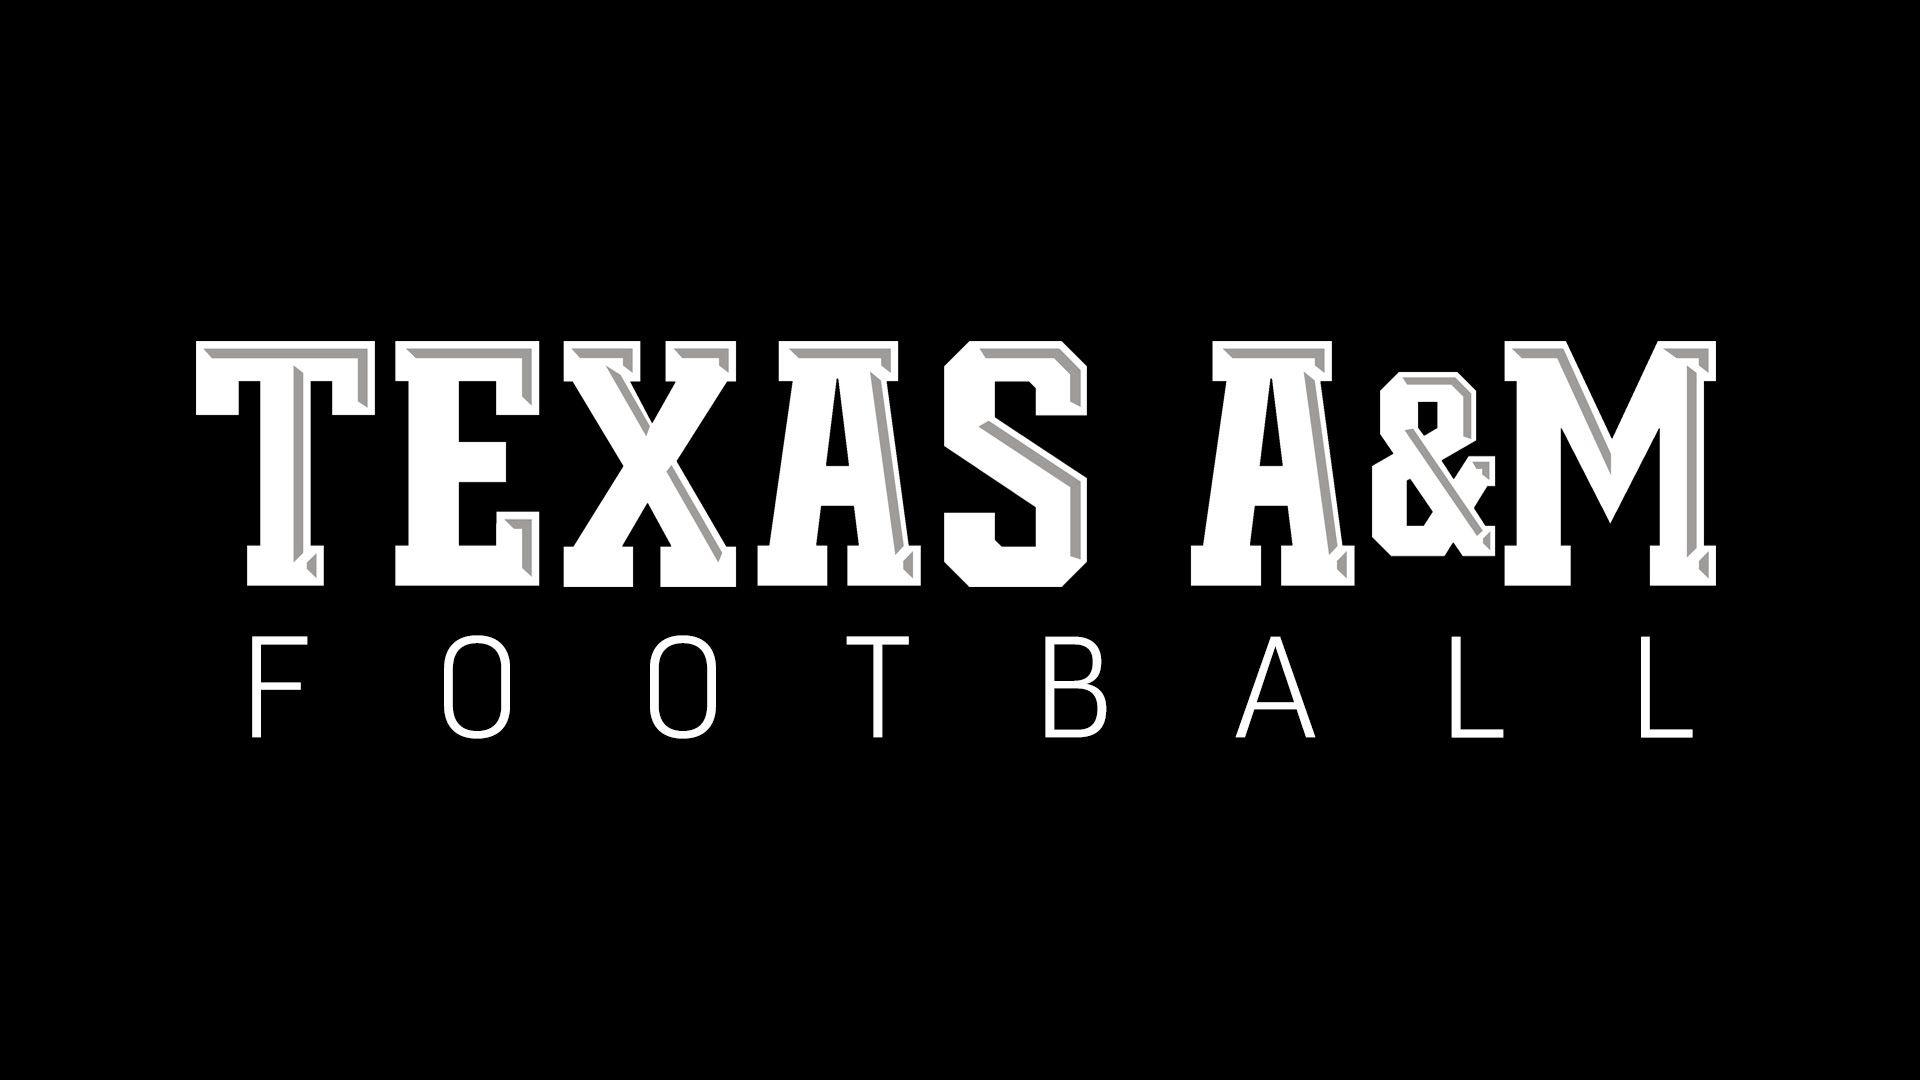 Texas A&M Football. It's About Us